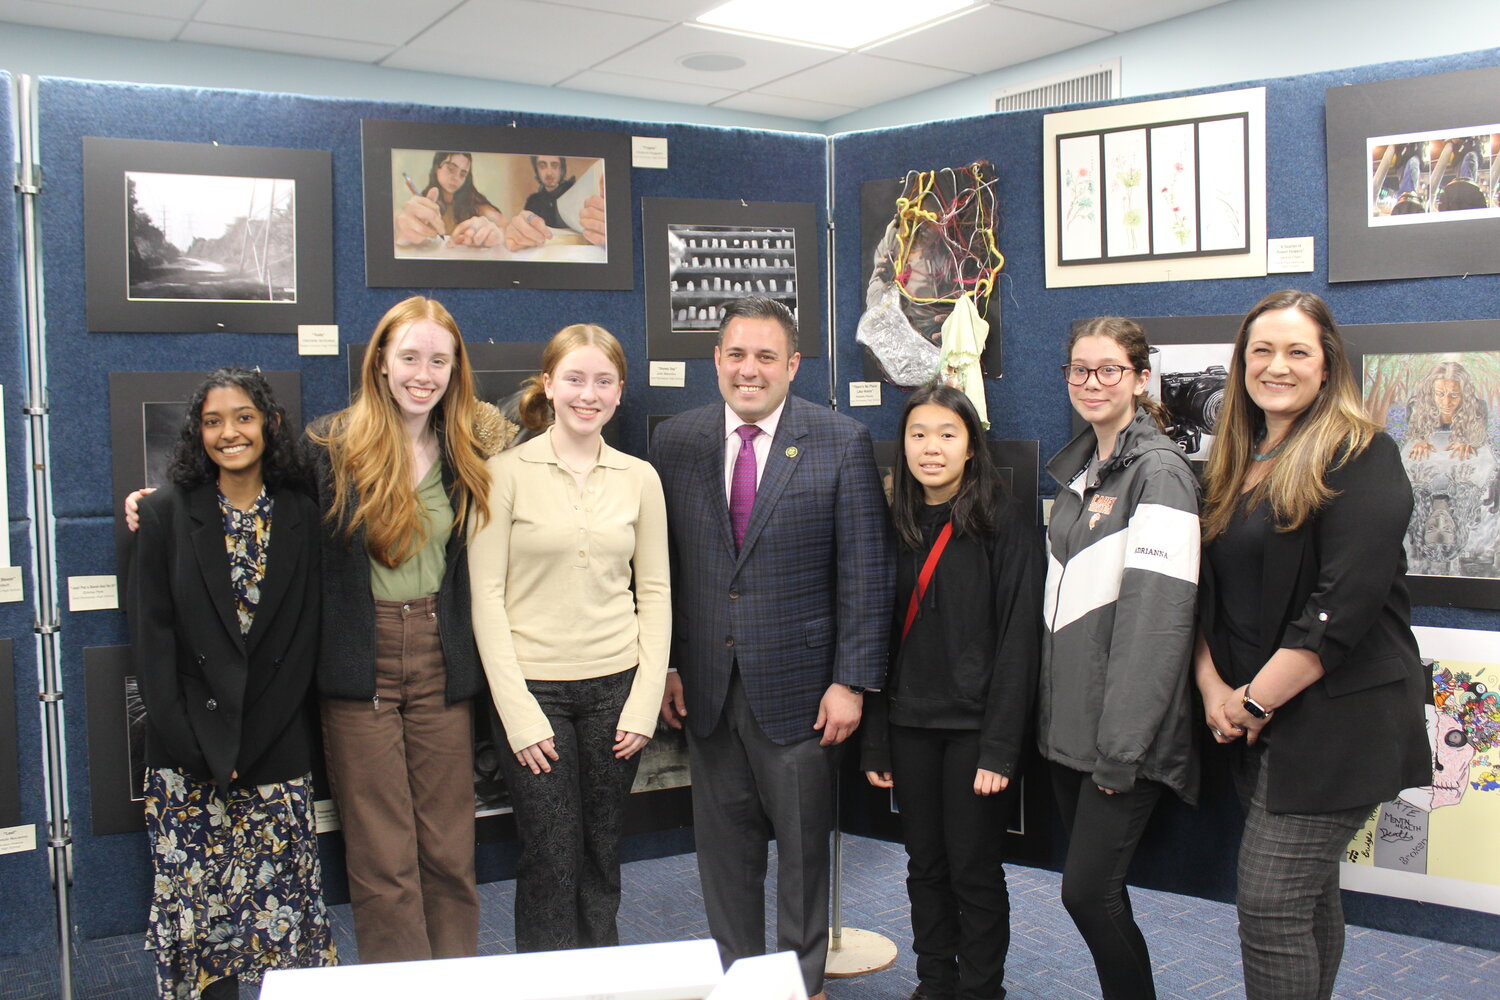 Students featured in the District Art Show with U.S. Rep. Anthony D’Esposito, who hosted the event at the Island Park Public Library.